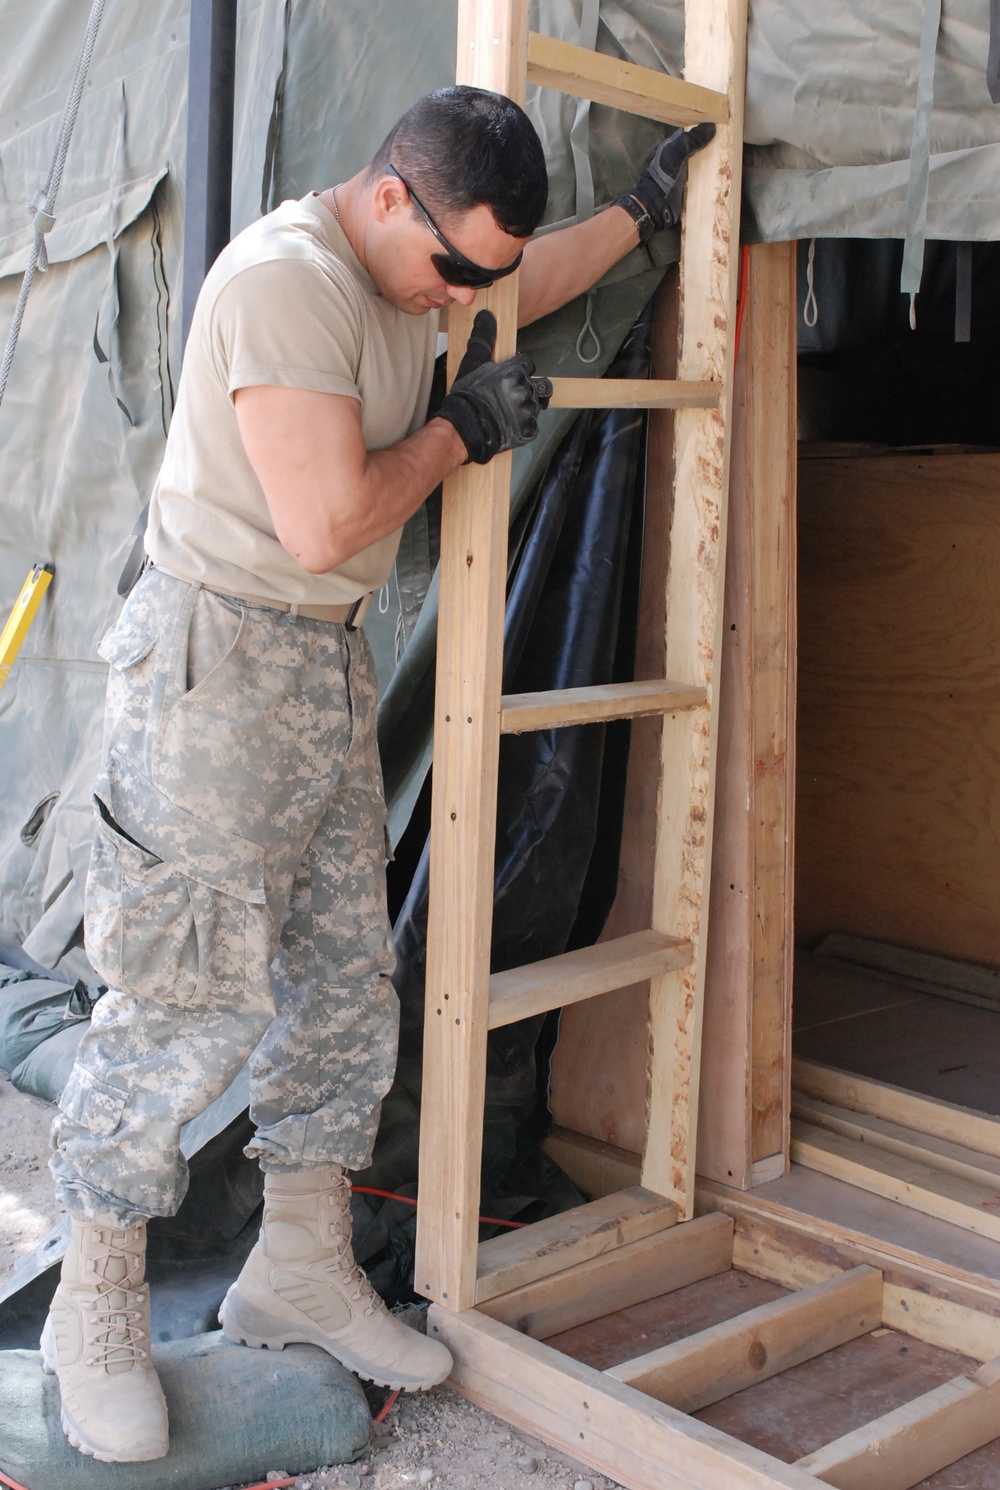 Infantryman Builds for Soldiers, Security, Morale